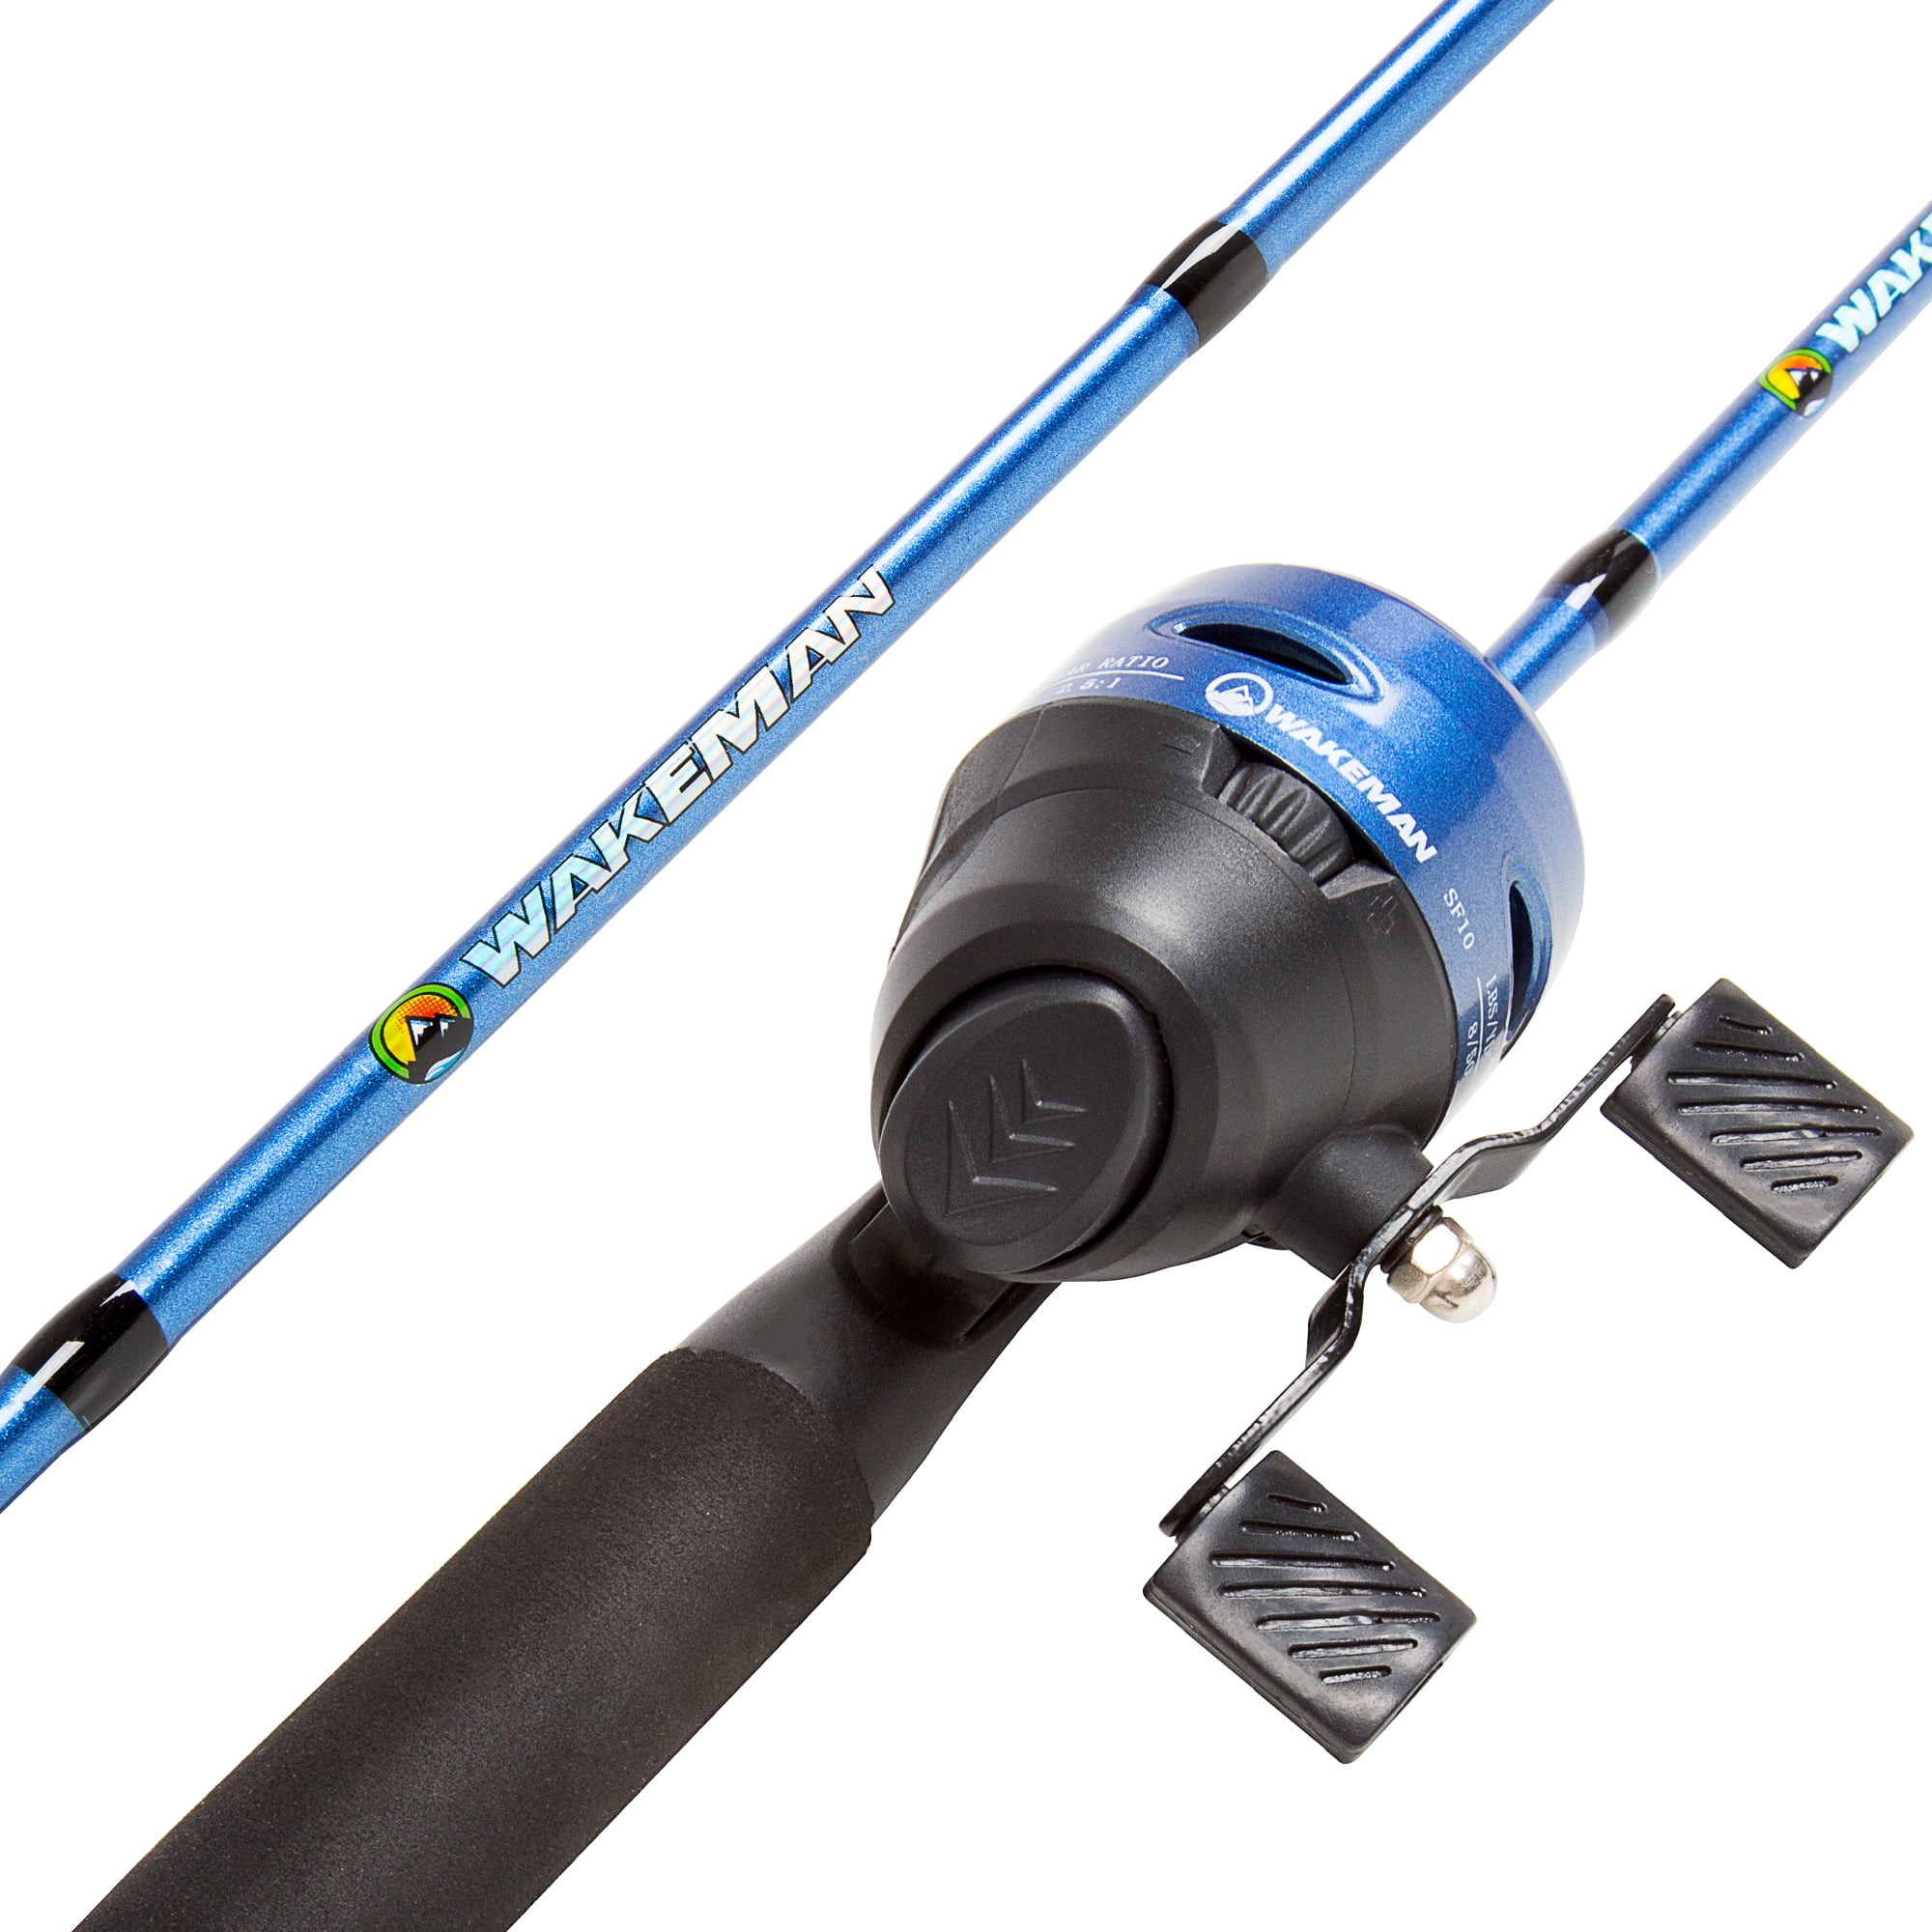 Fishing Pole – 64-Inch Fiberglass and Stainless Steel Rod and Pre-Spooled  Reel Combo for Lake, Pond and Stream Casting by Wakeman Outdoors (Blue;  Metallic Blue) 